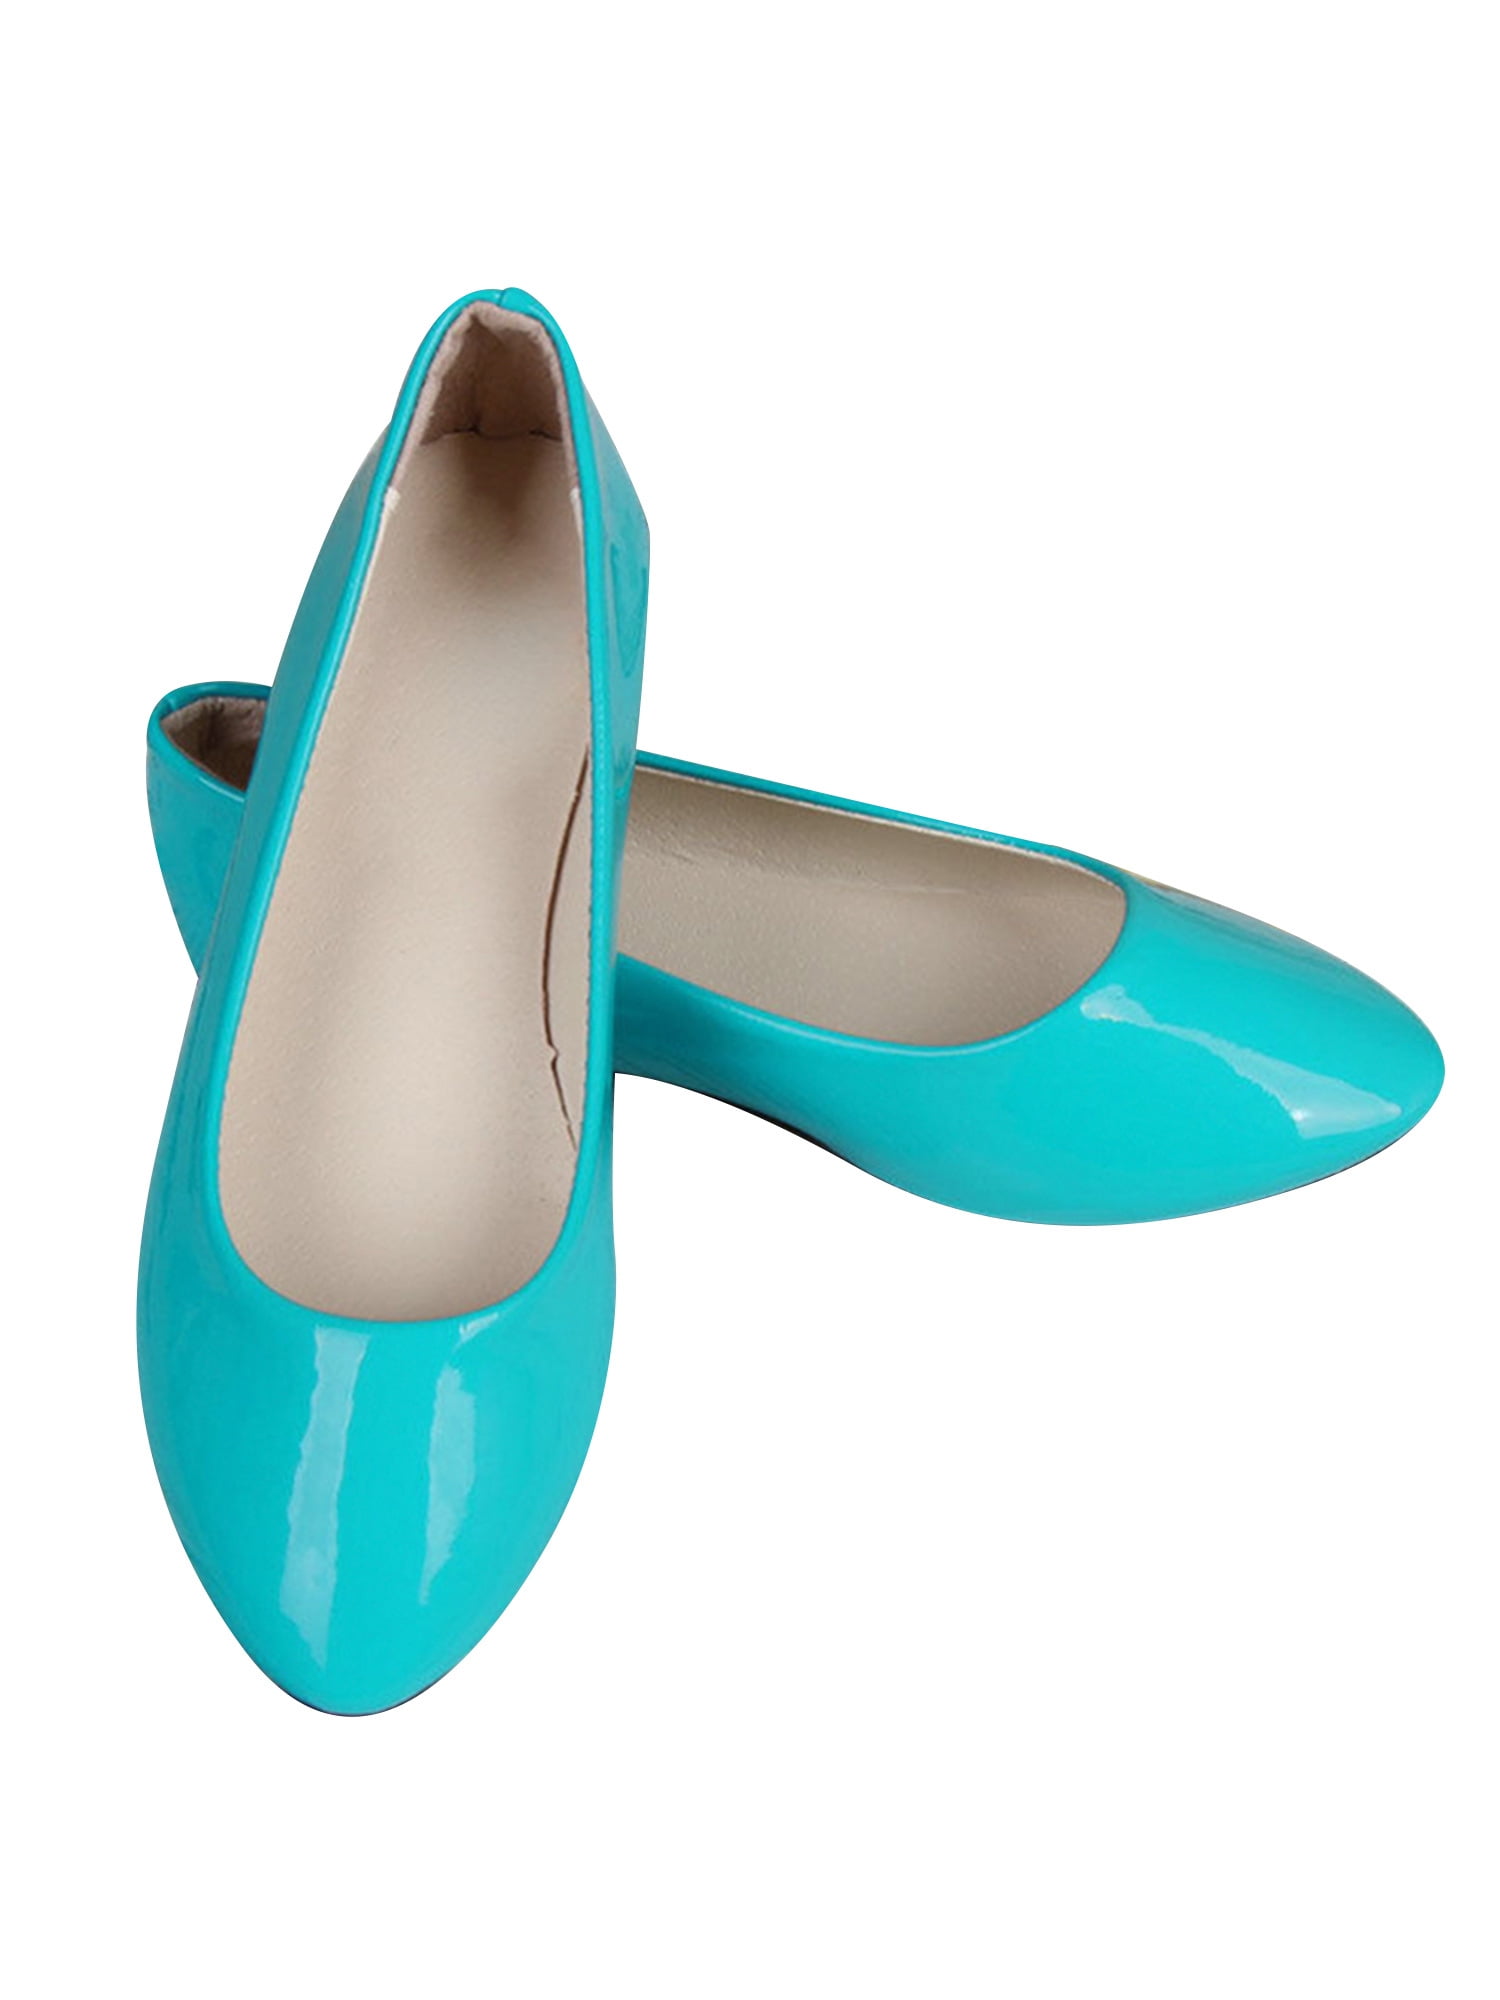 Details about   Lady Ballerina Ballet Dolly Pumps Dress Slip On Flat Boat Loafers Shoes Fashion 